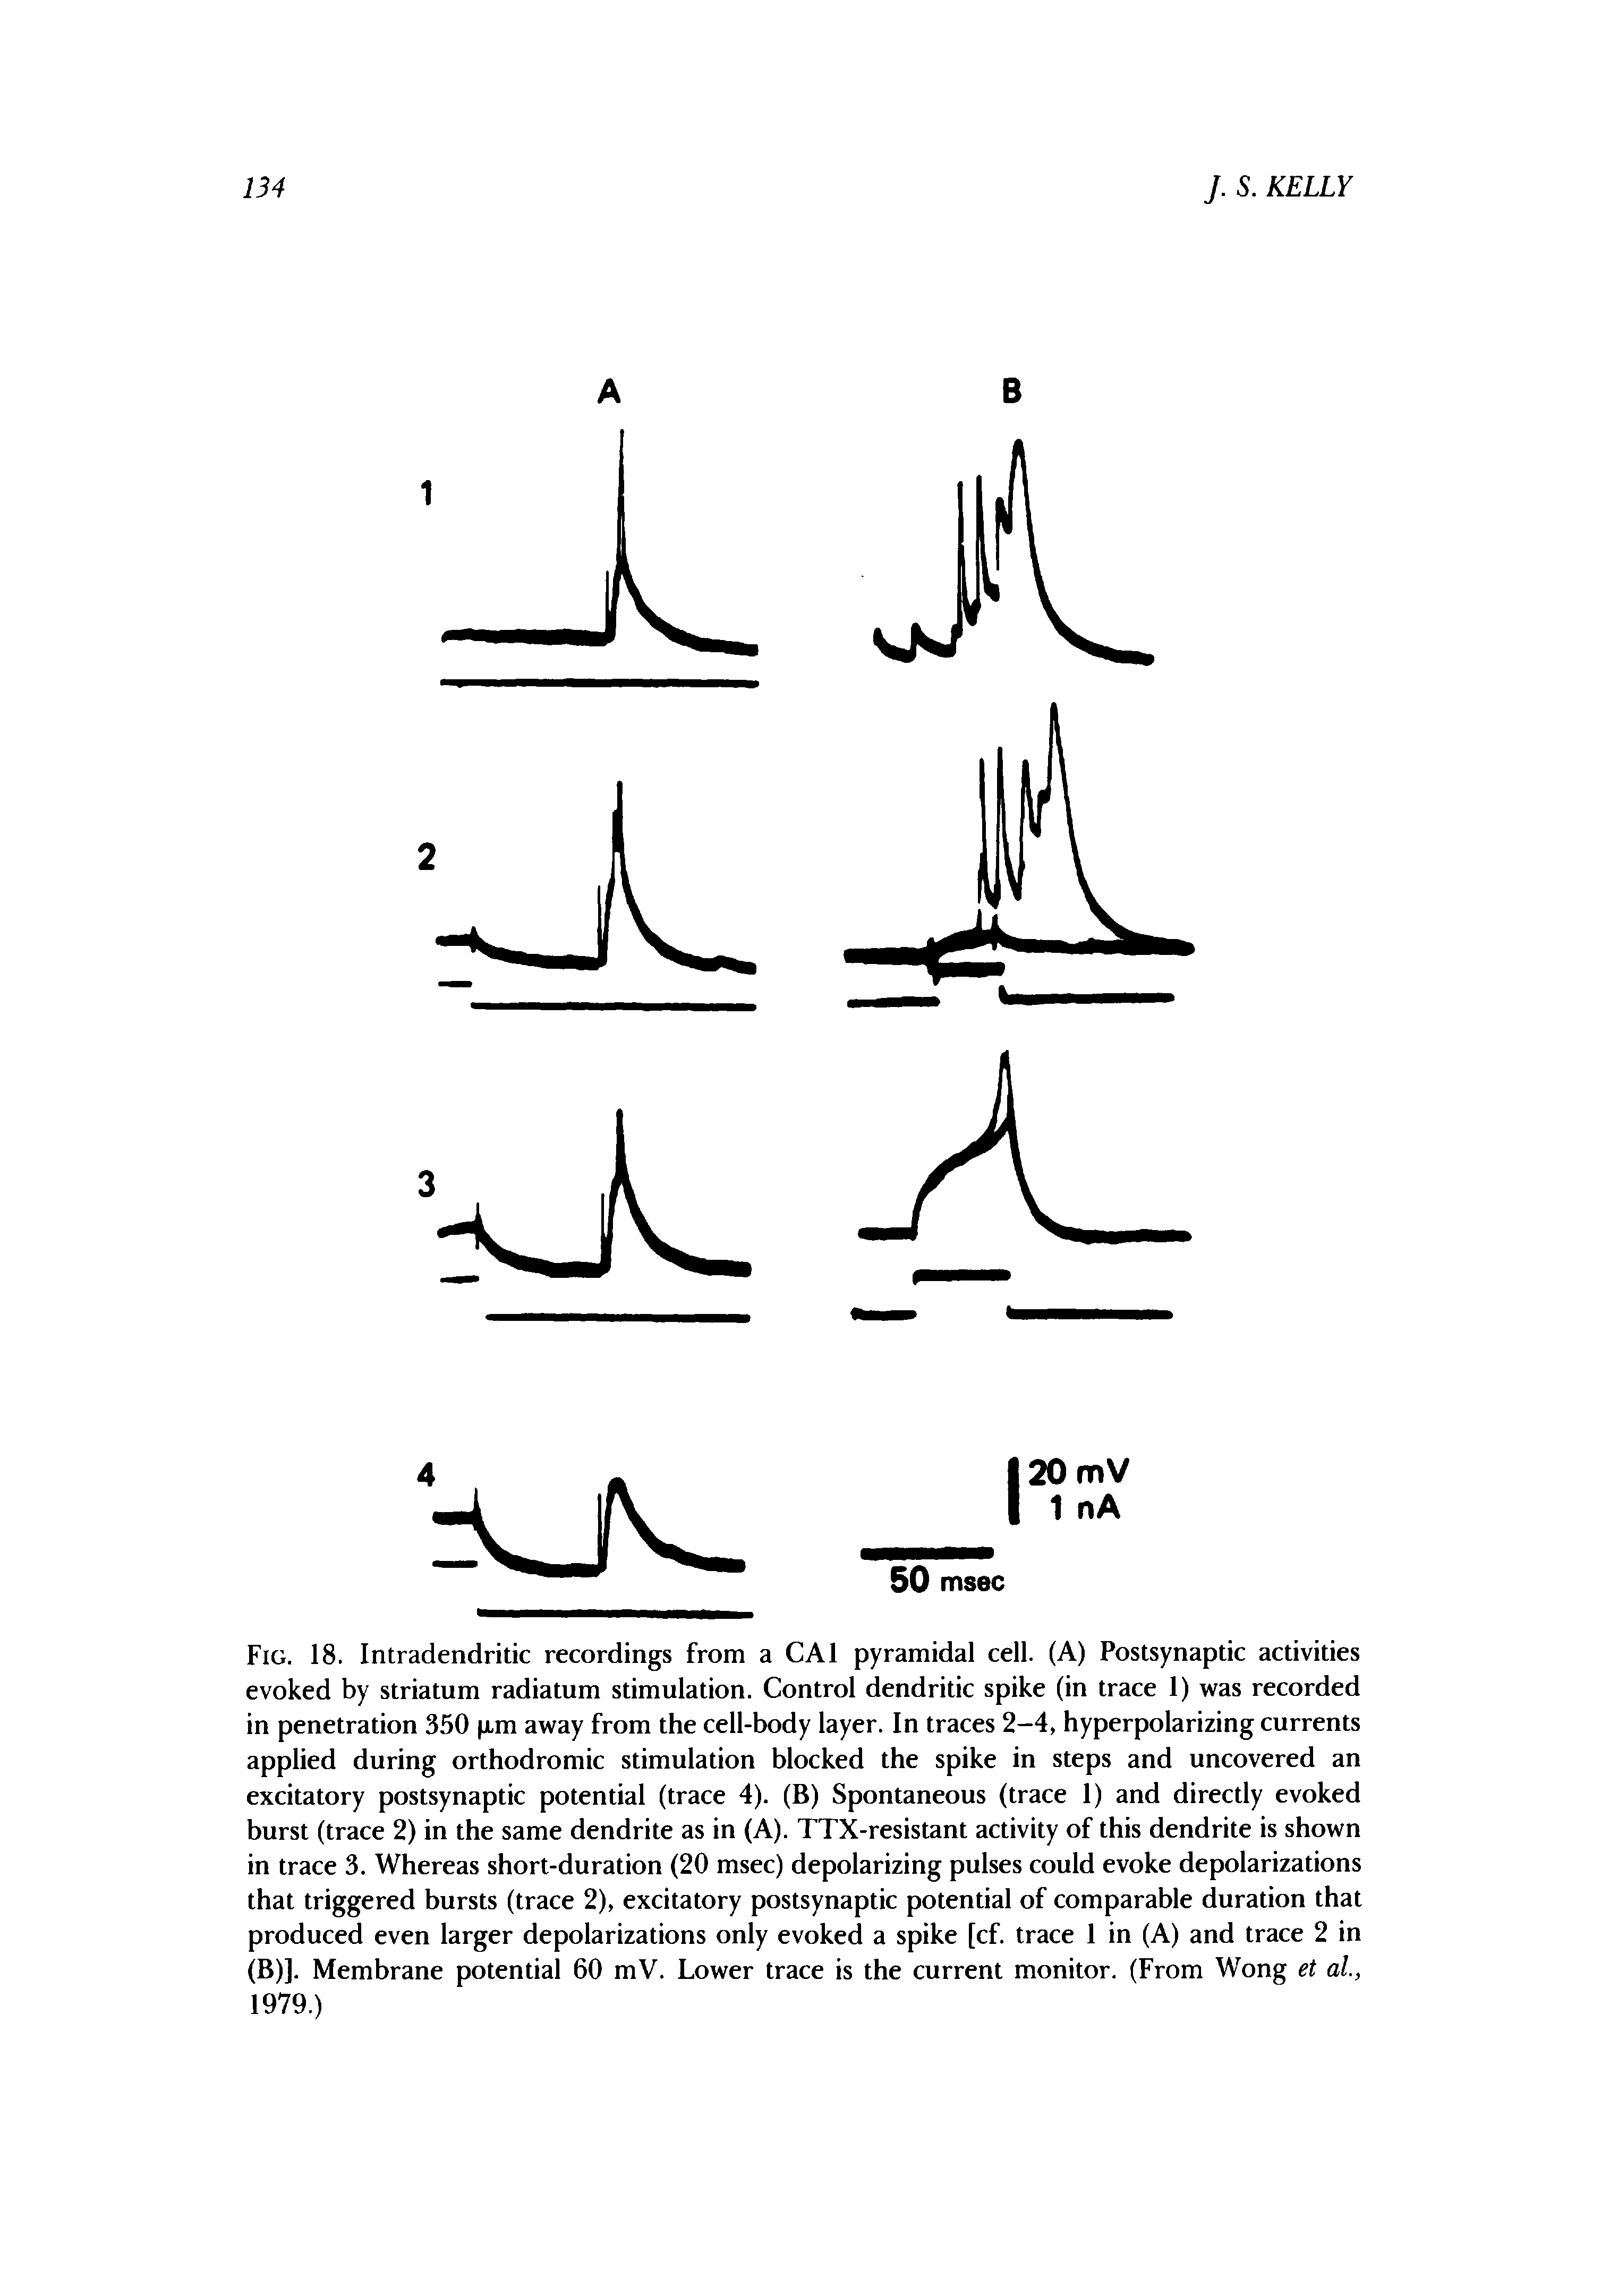 Fig. 18. Intradendritic recordings from a CAl pyramidal cell. (A) Postsynaptic activities evoked by striatum radiatum stimulation. Control dendritic spike (in trace 1) was recorded in penetration 350 p,m away from the cell-body layer. In traces 2-4, hyperpolarizing currents applied during orthodromic stimulation blocked the spike in steps and uncovered an excitatory postsynaptic potential (trace 4). (B) Spontaneous (trace 1) and directly evoked burst (trace 2) in the same dendrite as in (A). TTX-resistant activity of this dendrite is shown in trace 3. Whereas short-duration (20 msec) depolarizing pulses could evoke depolarizations that triggered bursts (trace 2), excitatory postsynaptic potential of comparable duration that produced even larger depolarizations only evoked a spike [cf. trace 1 in (A) and trace 2 in (B)]. Membrane potential 60 mV. Lower trace is the current monitor. (From Wong et ai, 1979.)...